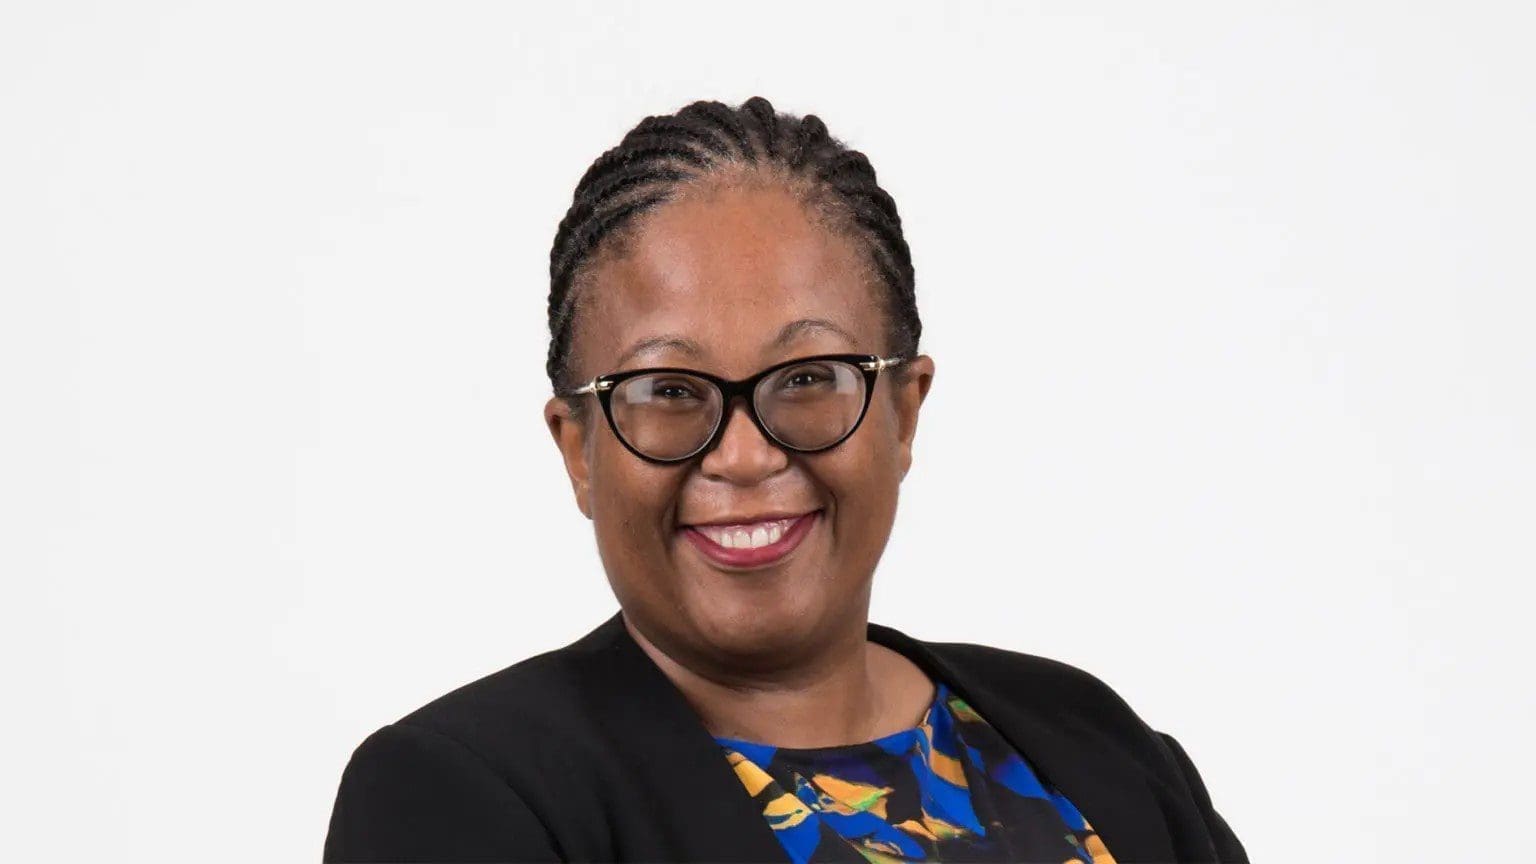 South African e-tailer Takealot appoints Mamongae Mahlare as new Group CEO, KFC launches whatsapp ordering system